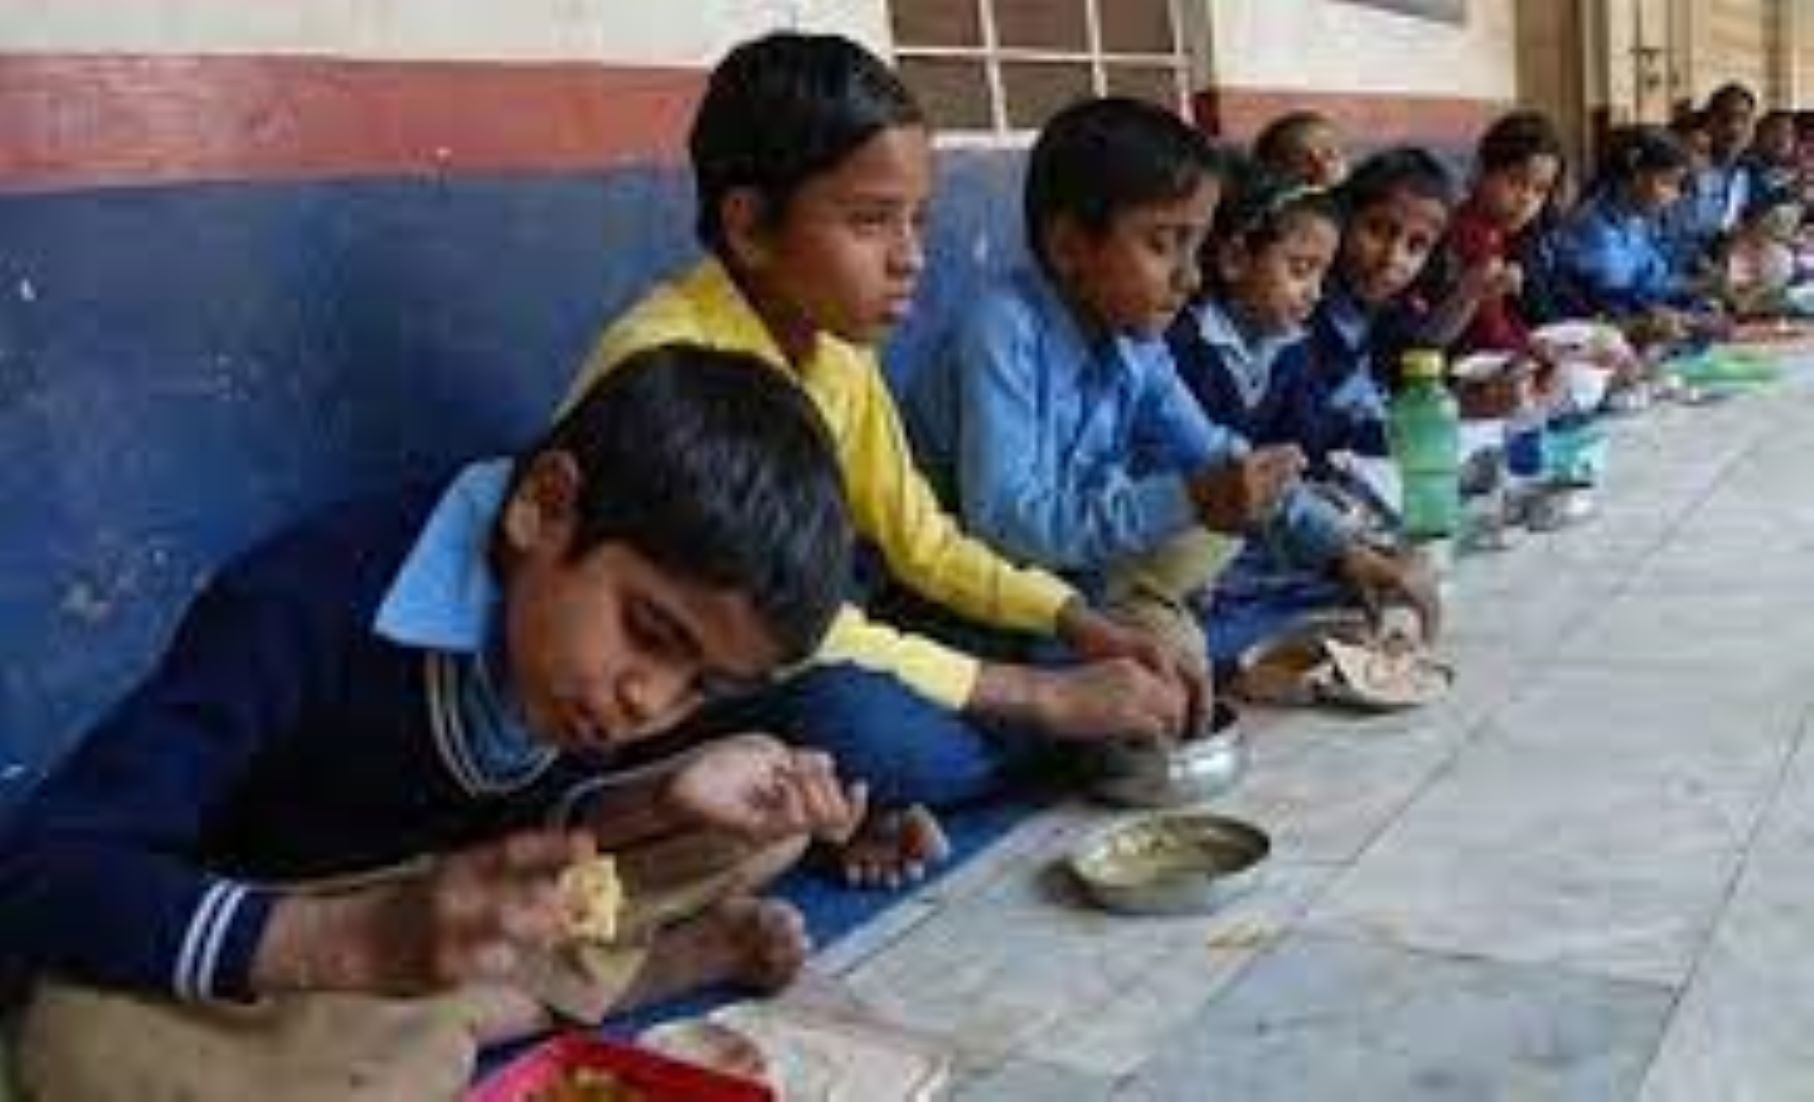 Food Poisoning Sickens 60 Students In Punjab